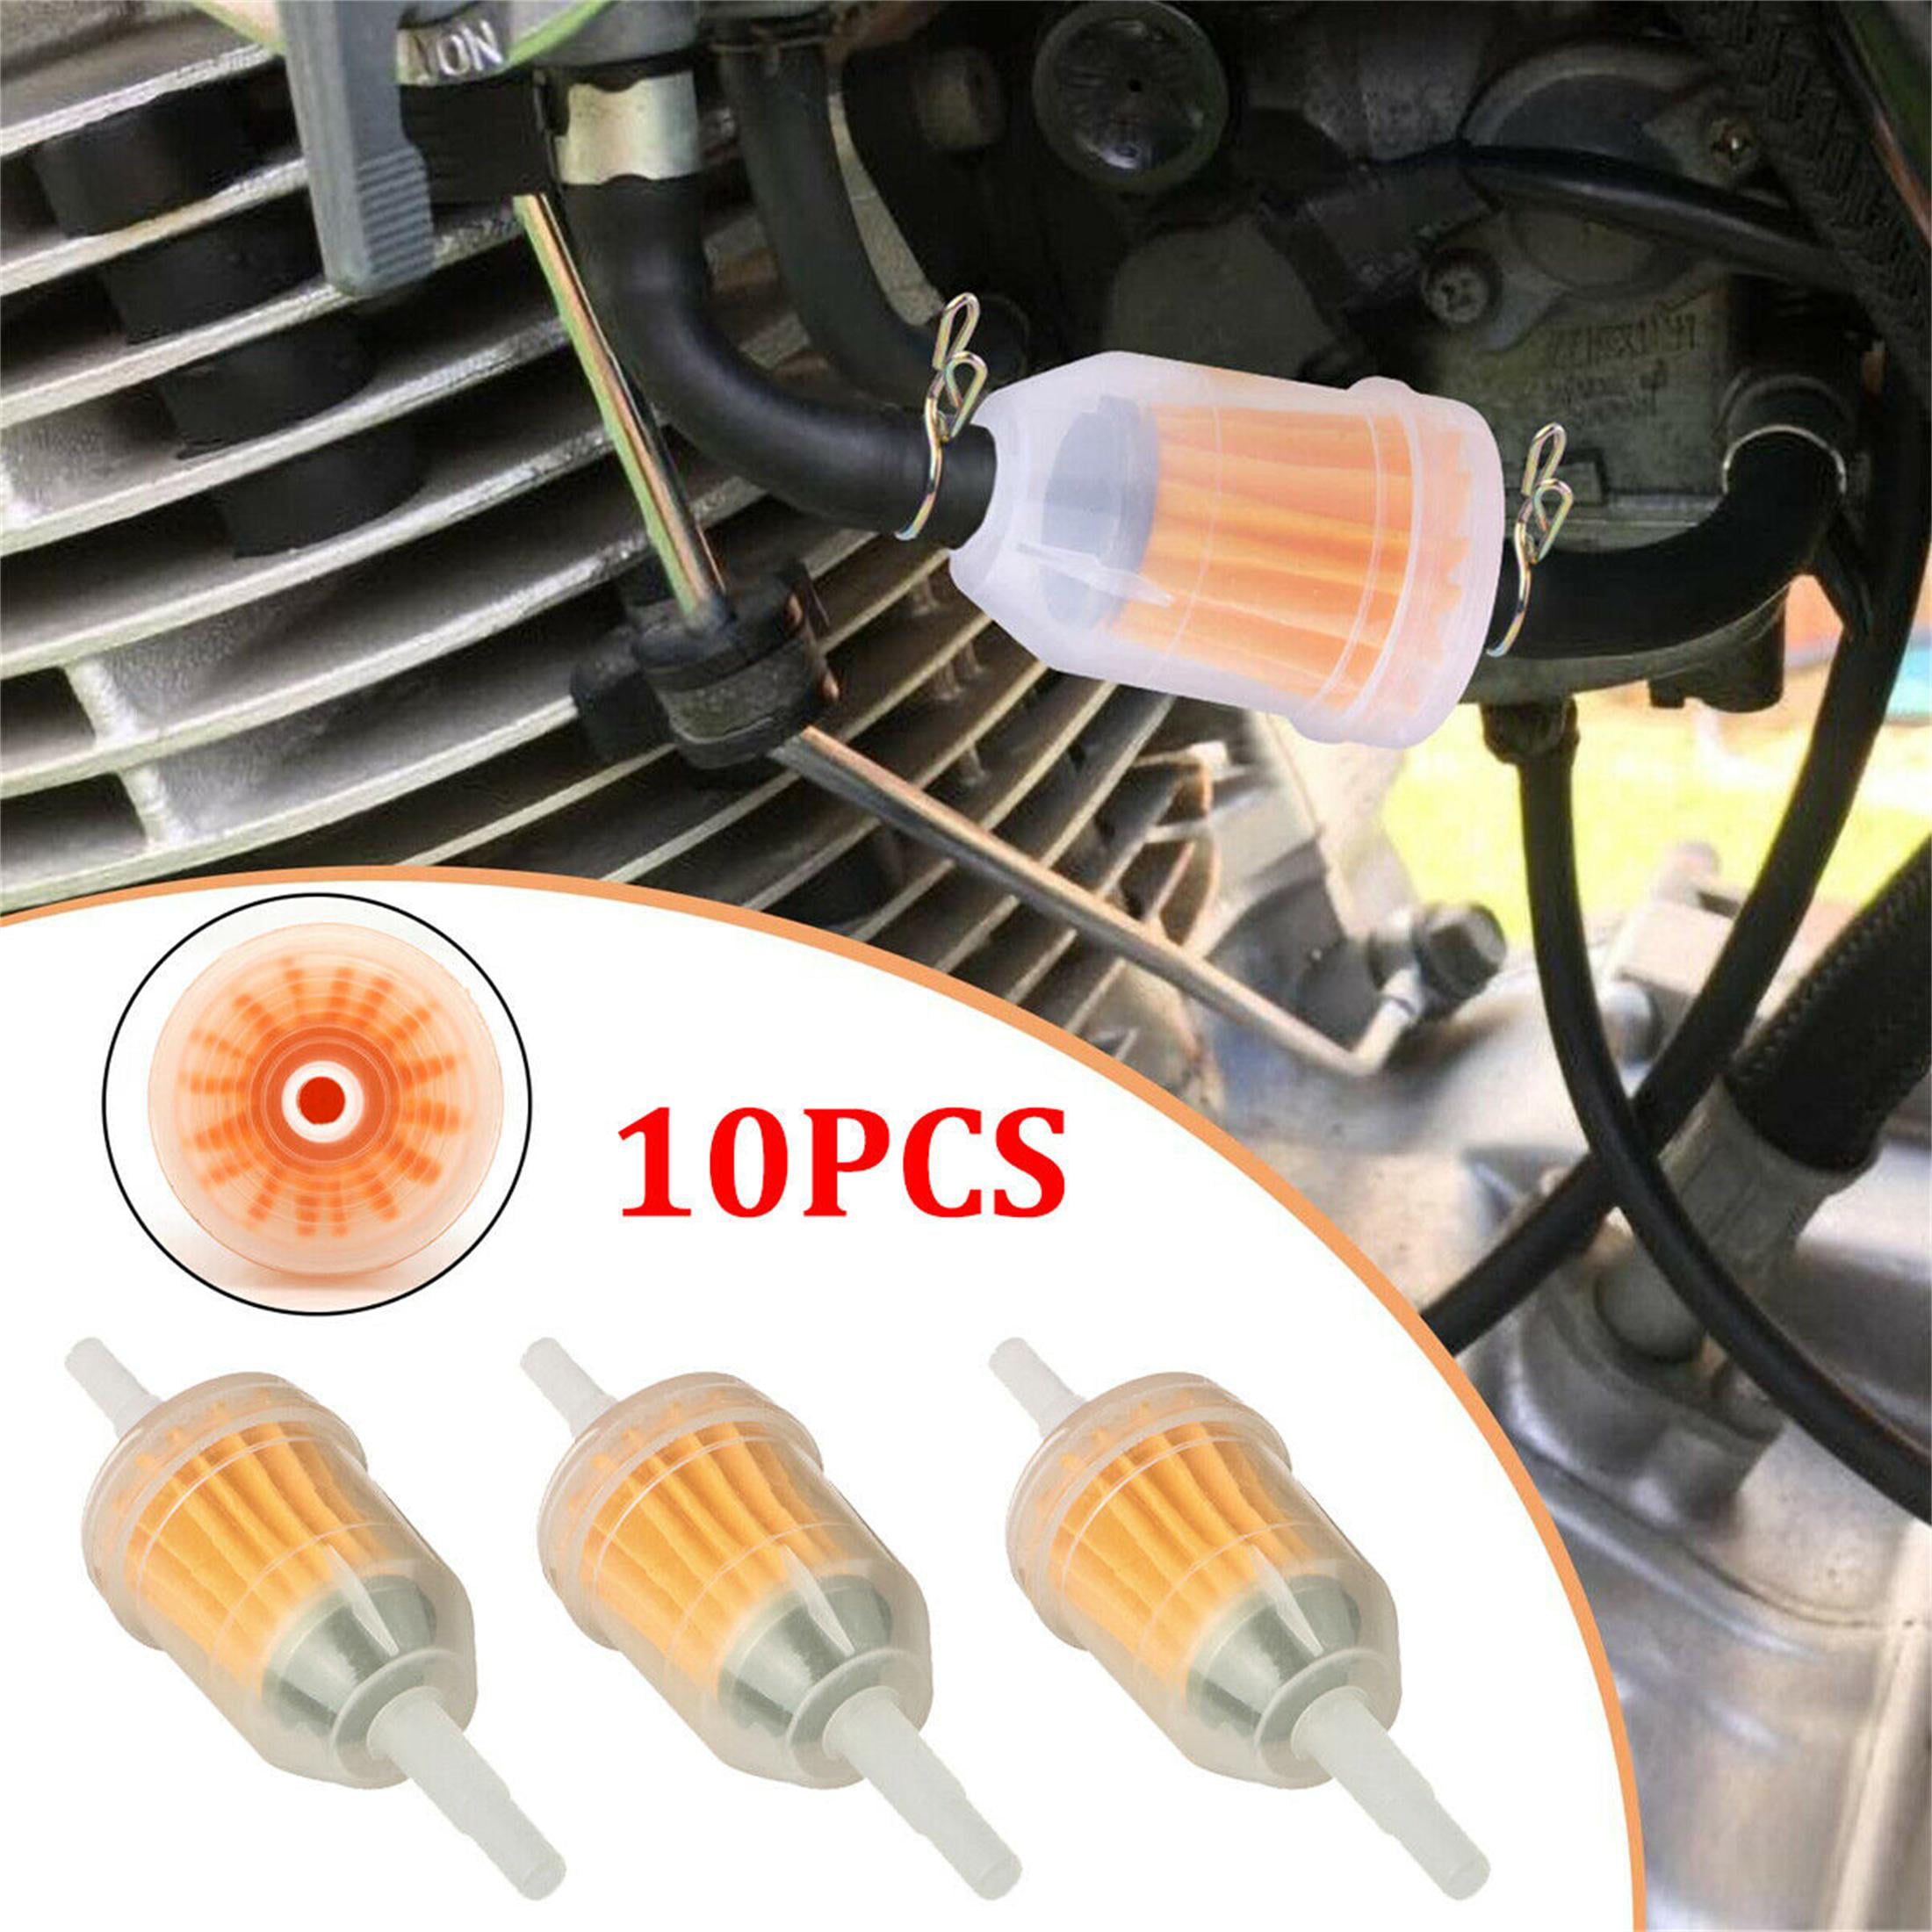 10PCS Motor Inline Gas Oil Fuel Filter Small Engine For 1/4'' 5/16" Line US